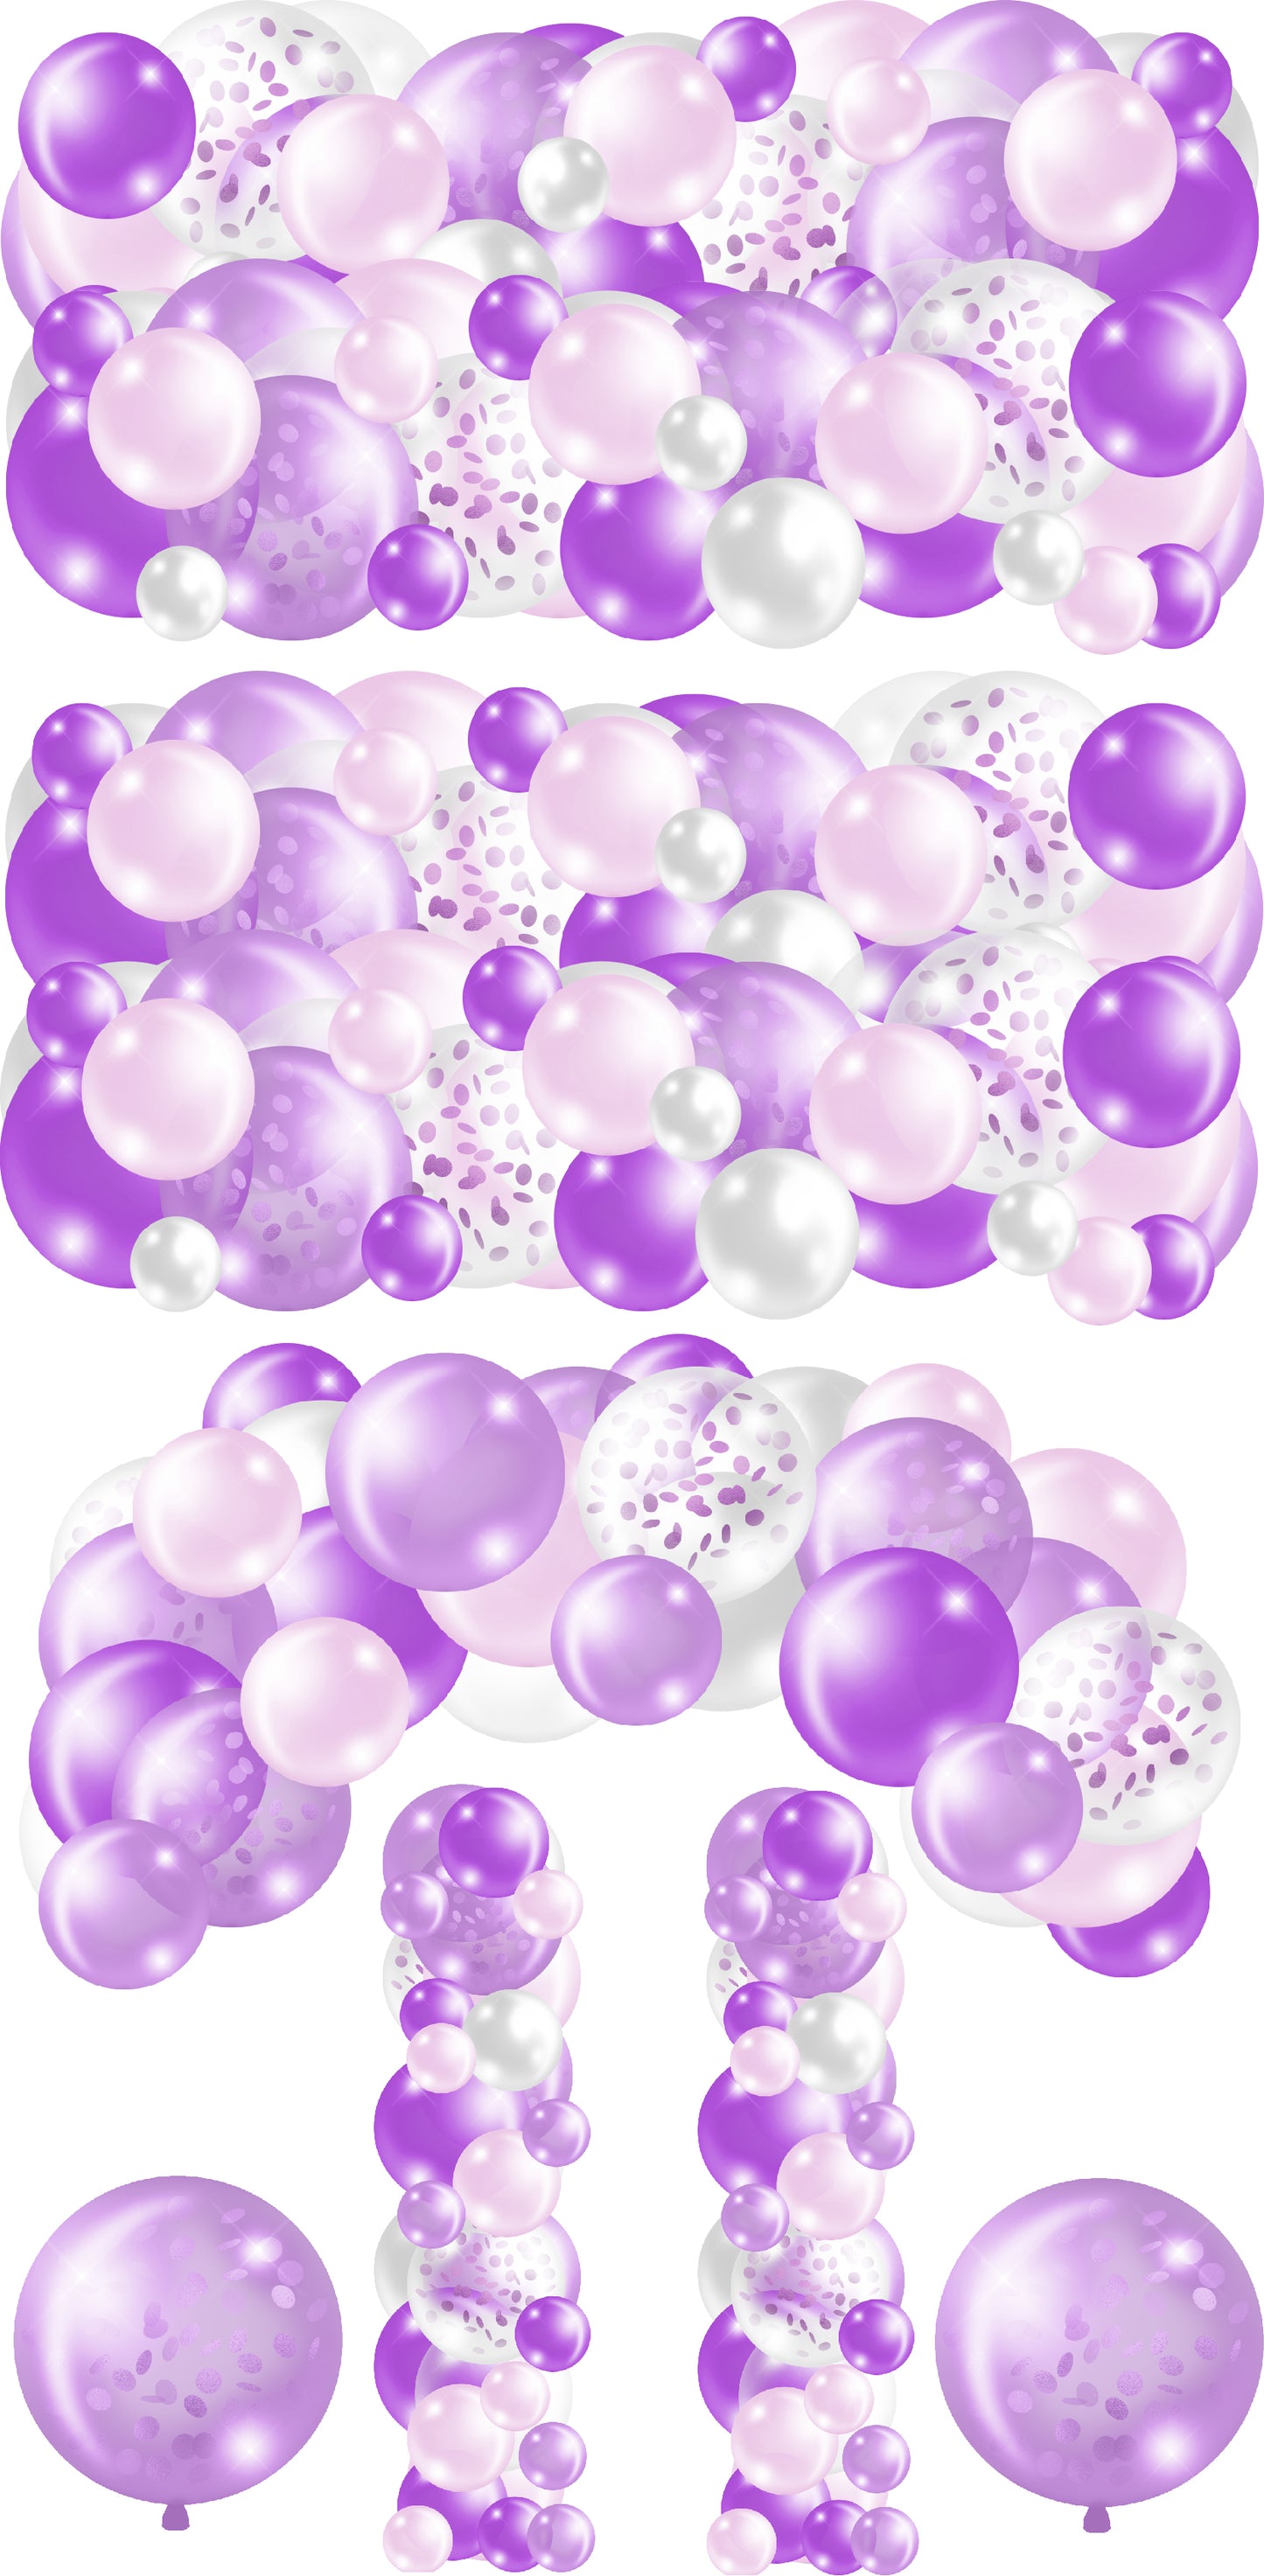 Purple and White Balloons Bunches Skirts, Ez Fillers, Arch, and Column